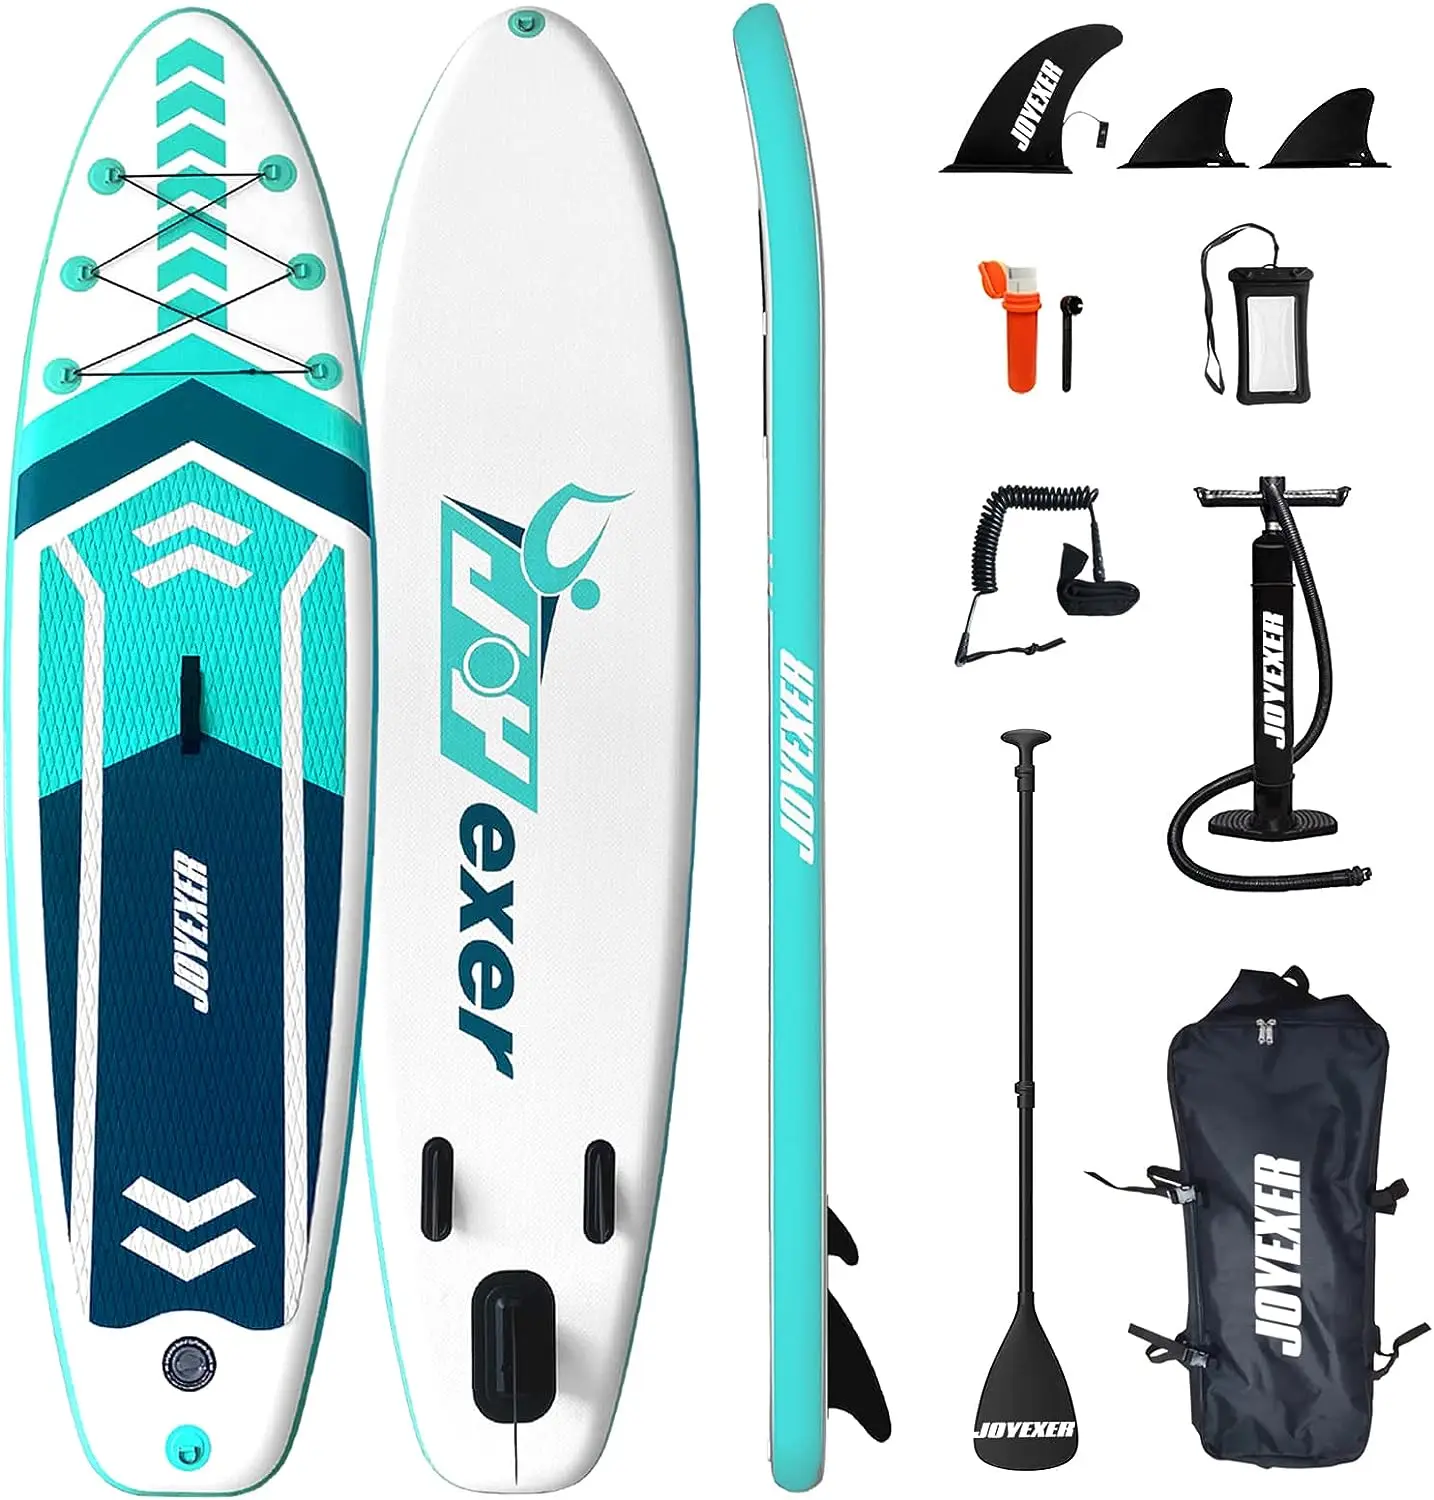 

Stand Up Paddle Board-10'5"x31"x 6" SUP ISUP Board Including Backpack,Paddle,Waterproof Phone case,Leash, Hand ,